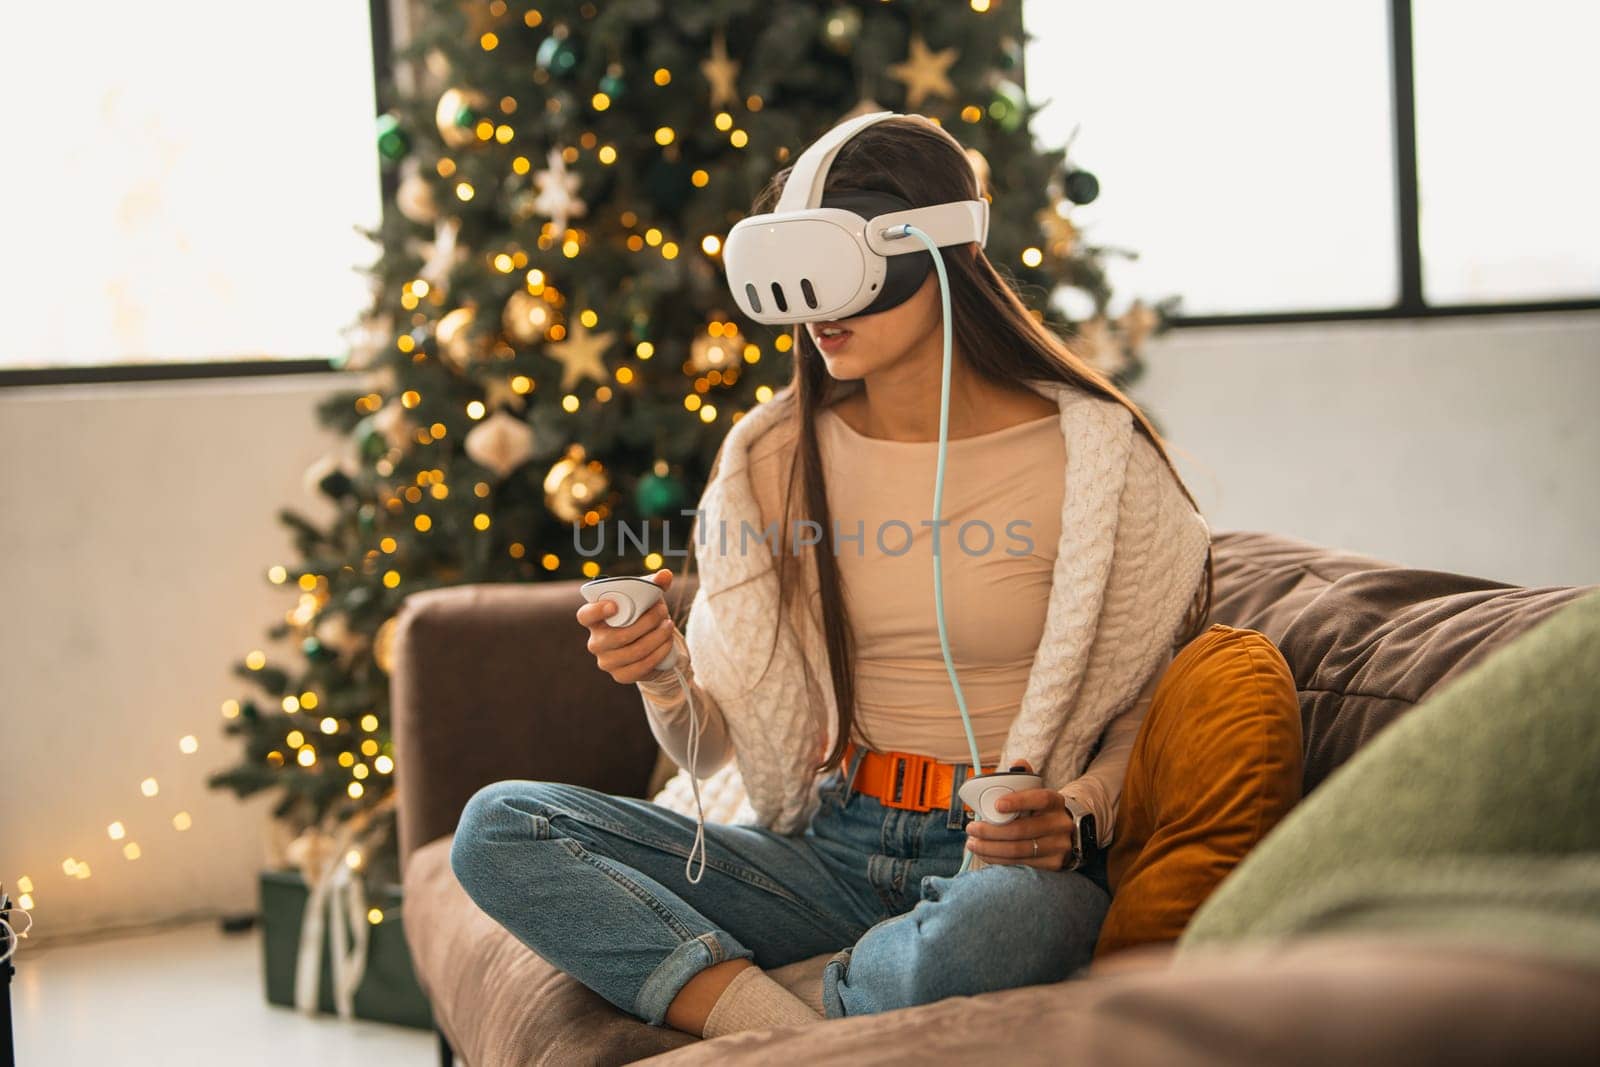 In the snug setting of a Christmas celebration at home, a fashionable young lady utilizes a virtual reality headset. by teksomolika